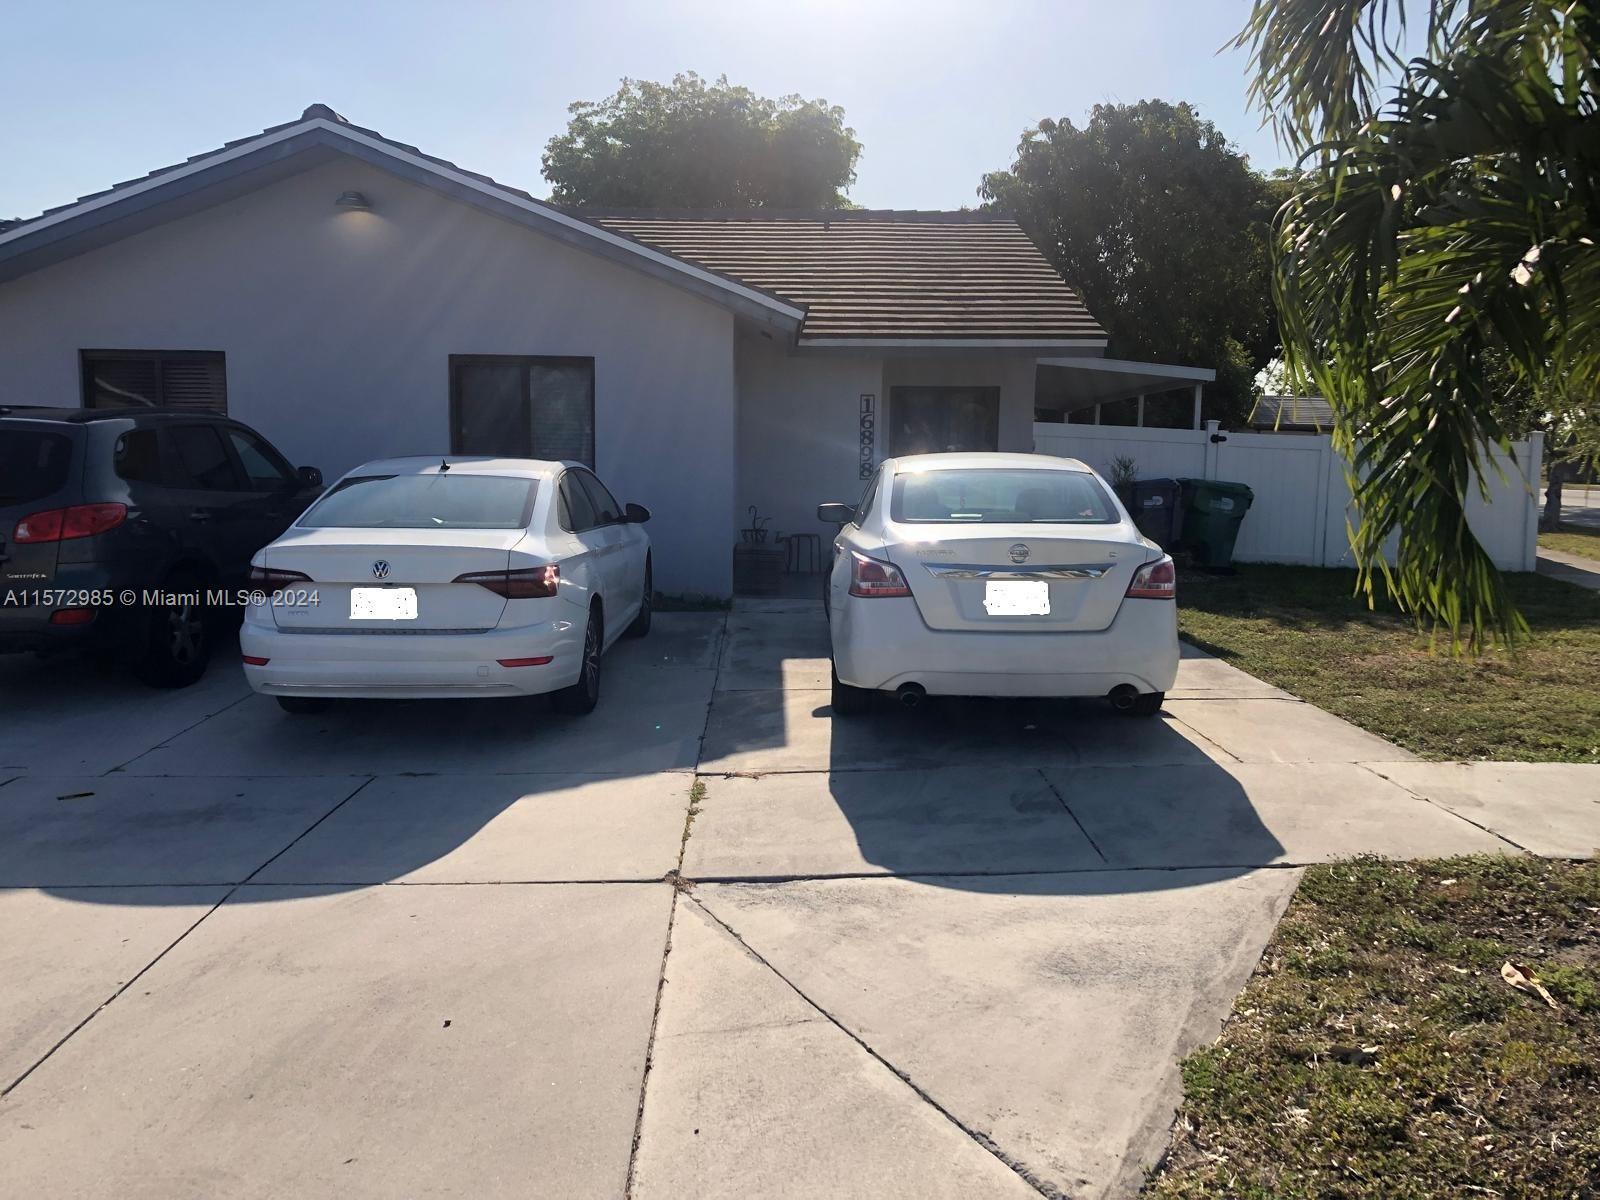 Photo of 16898 NW 70th Ave in Hialeah, FL